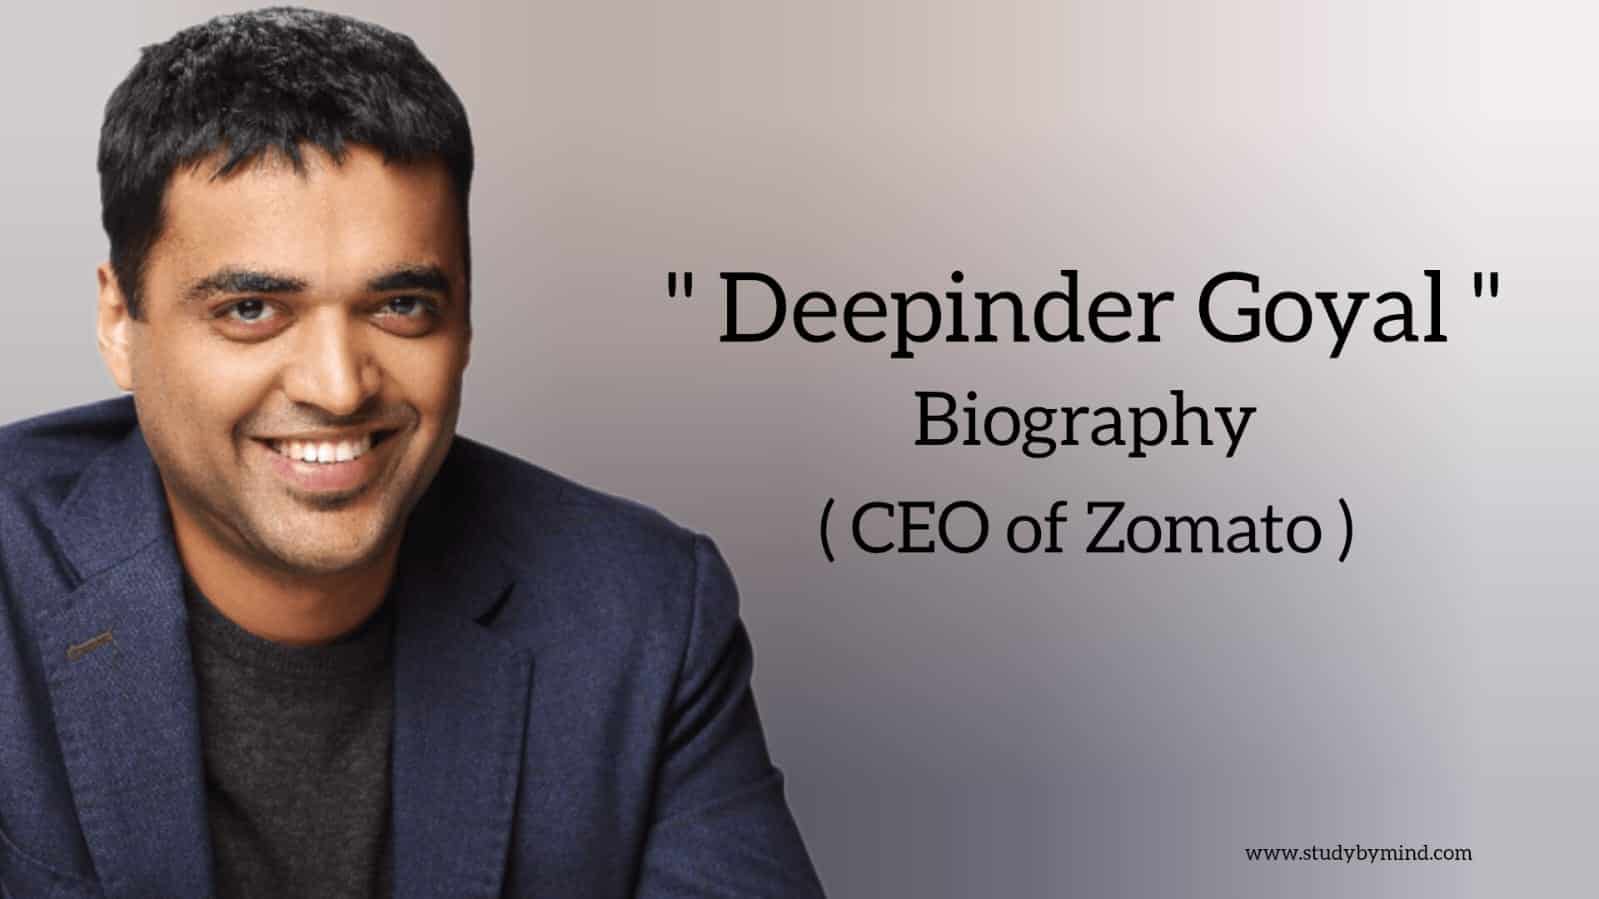 You are currently viewing Deepinder goyal biography in english (CEO of Zomato)